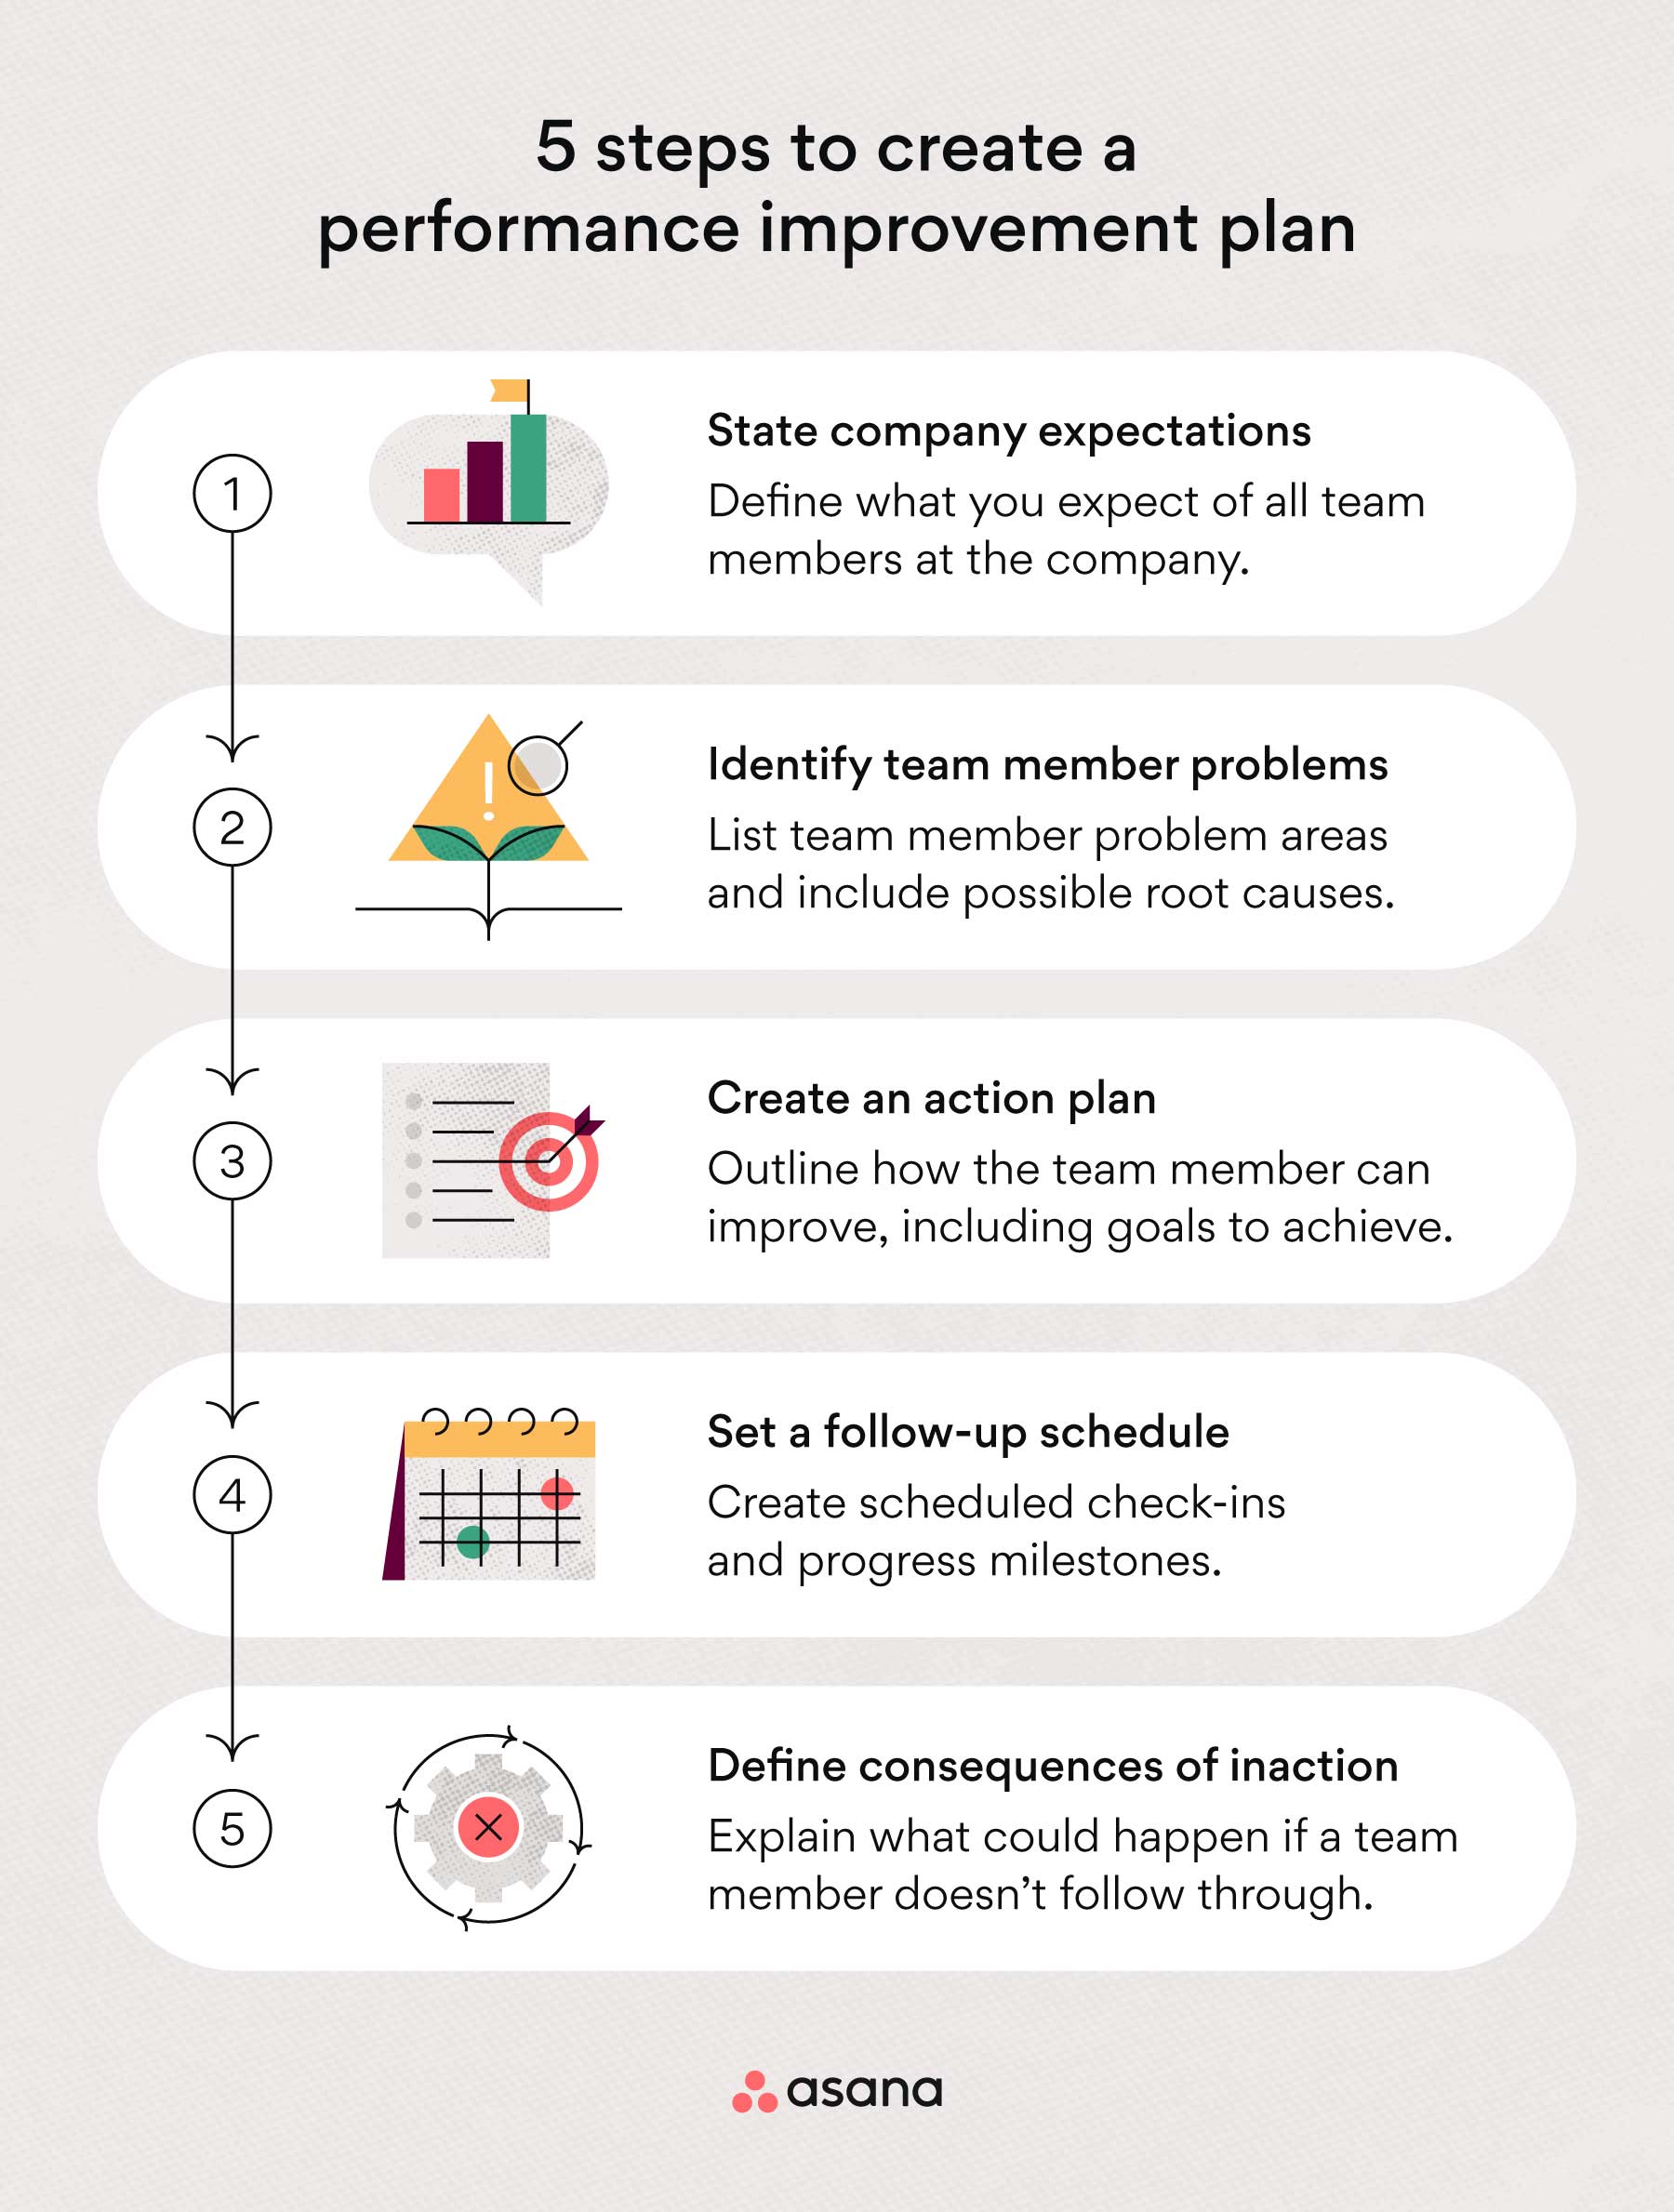 5 steps for create a performance improvement plan